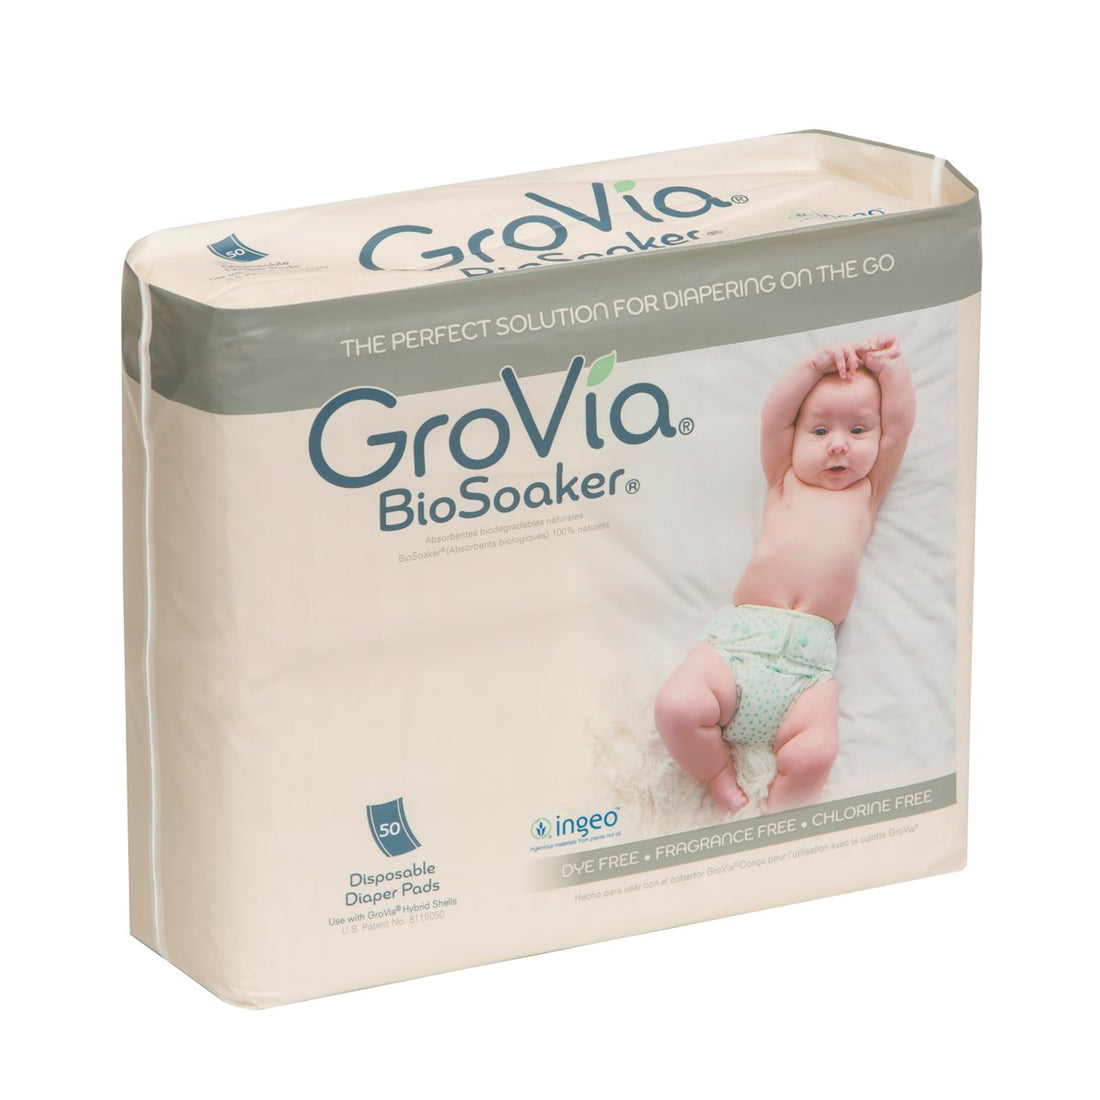 Biosoaker for Cloth Diapers (50 pk)